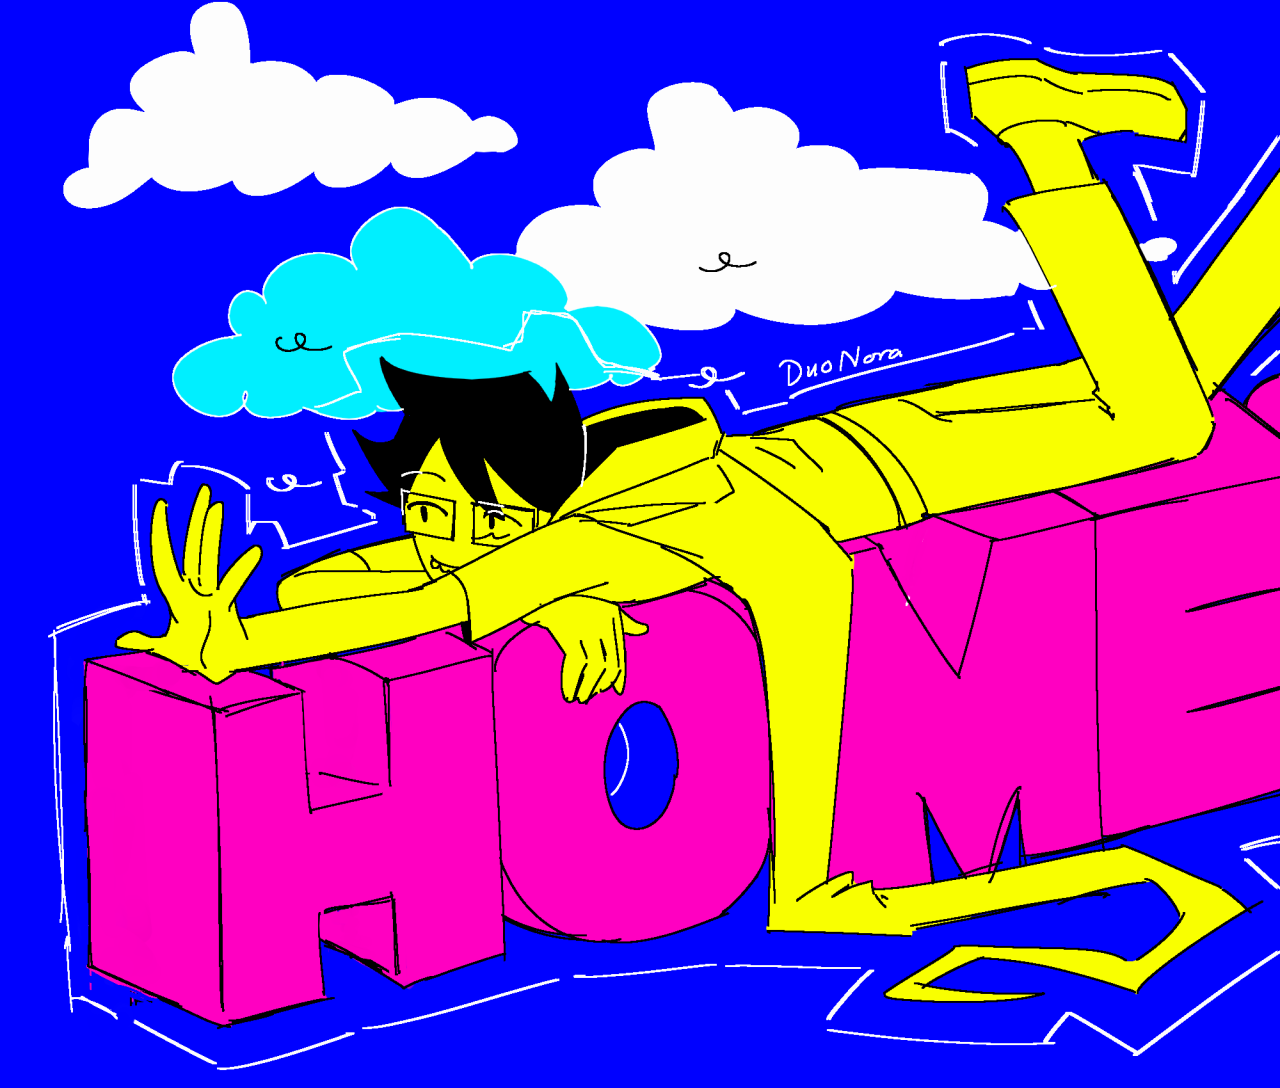 duonora:me home who stuck john egbert content porn pictures